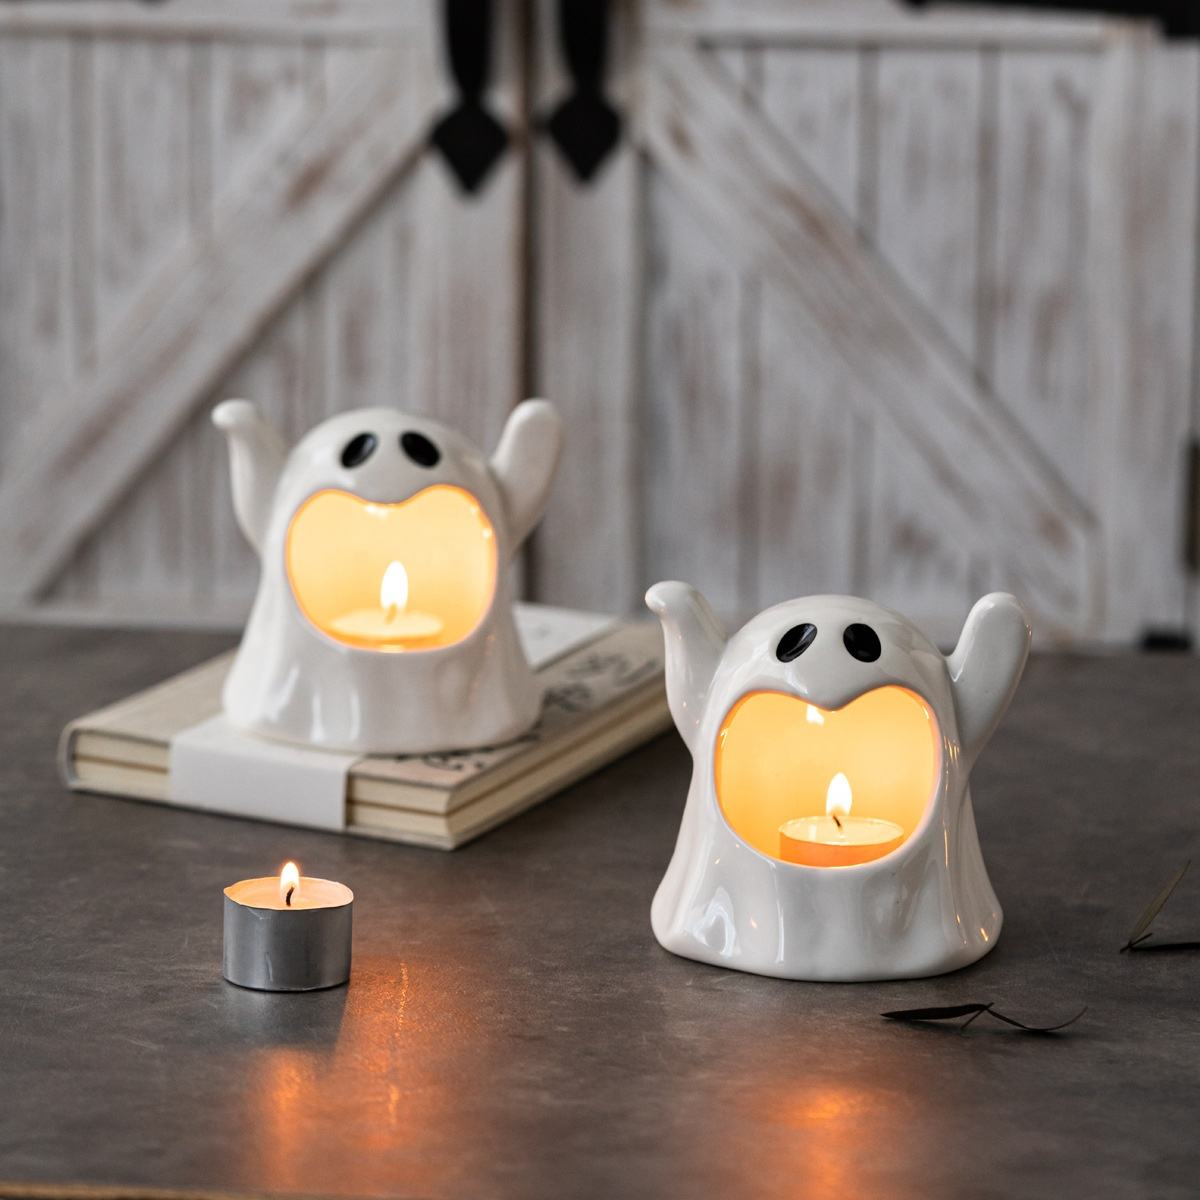 Hot Sale Halloween Ceramic Ghost Candlestick Utensil Ornament Home Desktop Aromatherapy Candle Holder Container Wholesale